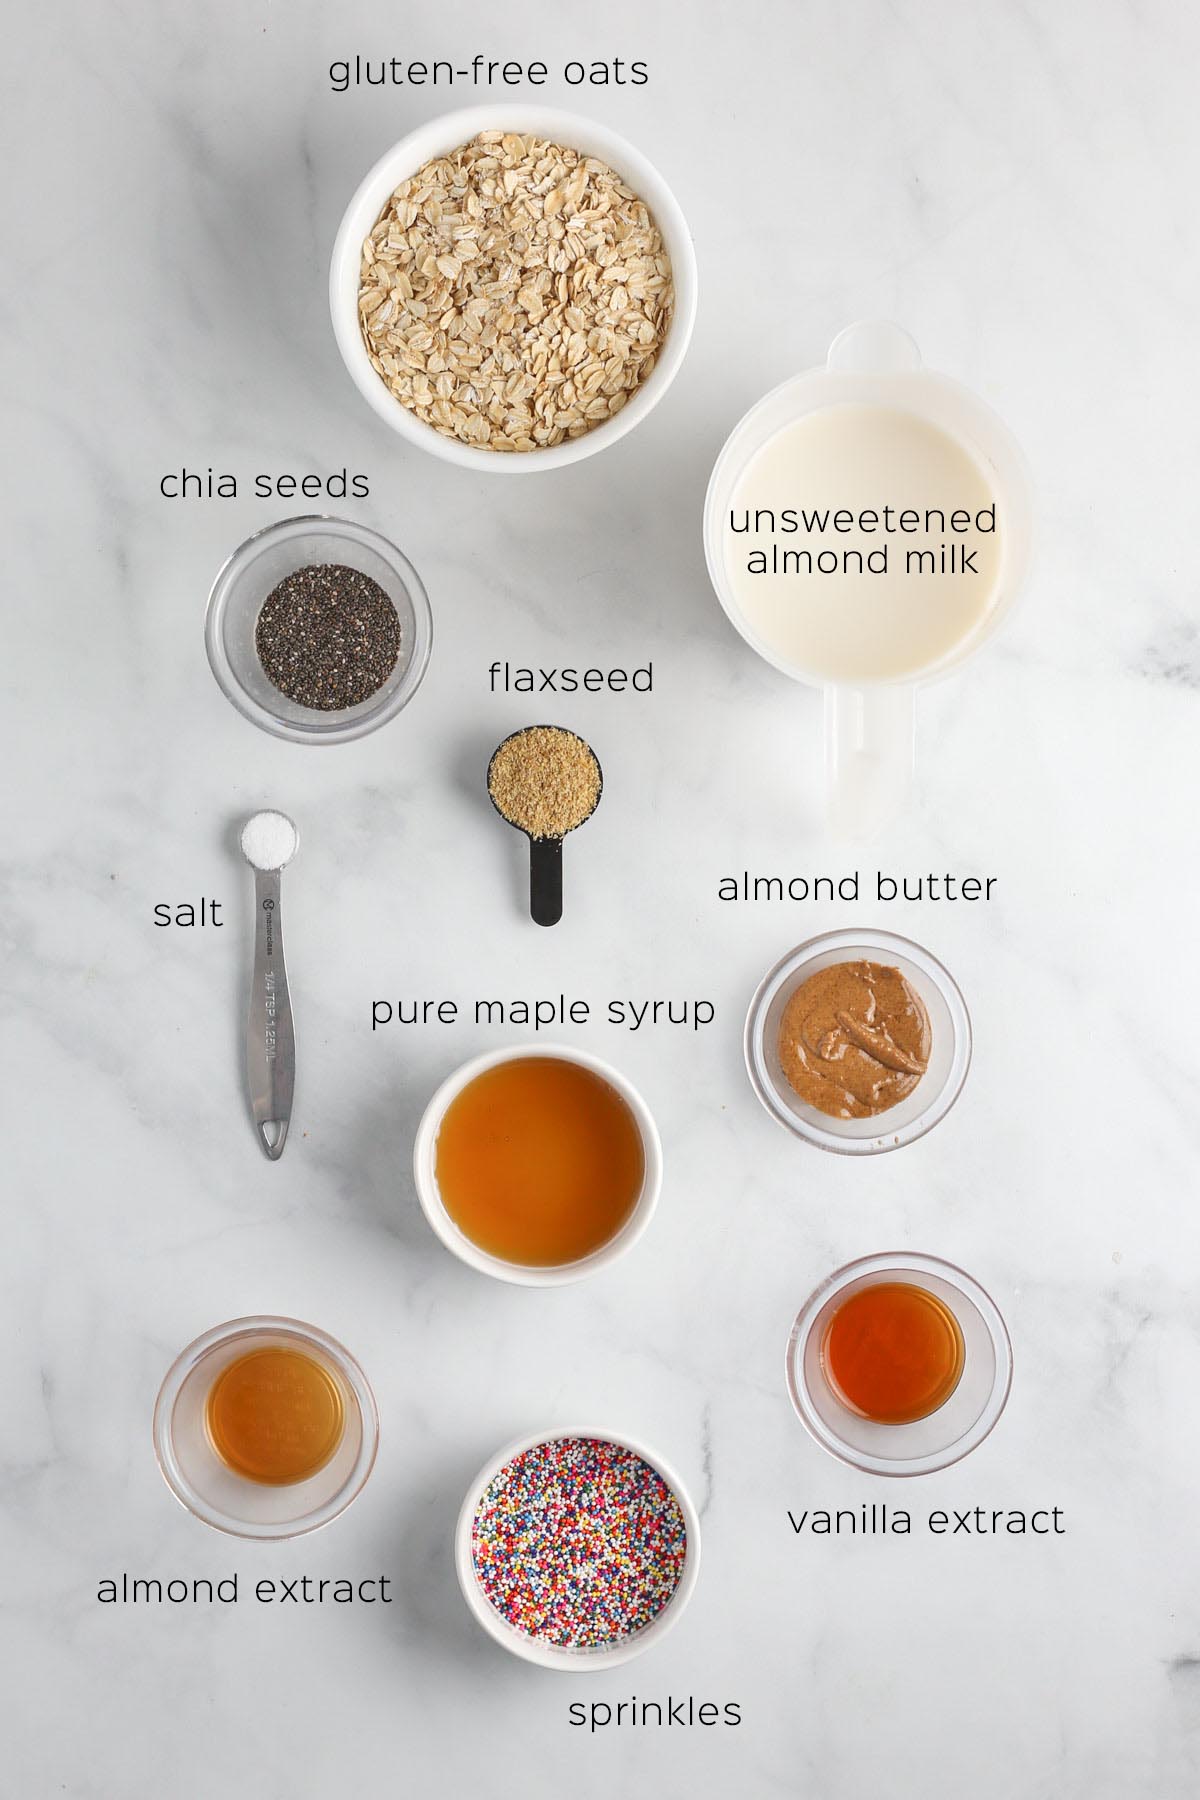 all ingredients to make the overnight oats placed in small white dishes on a marble surface.